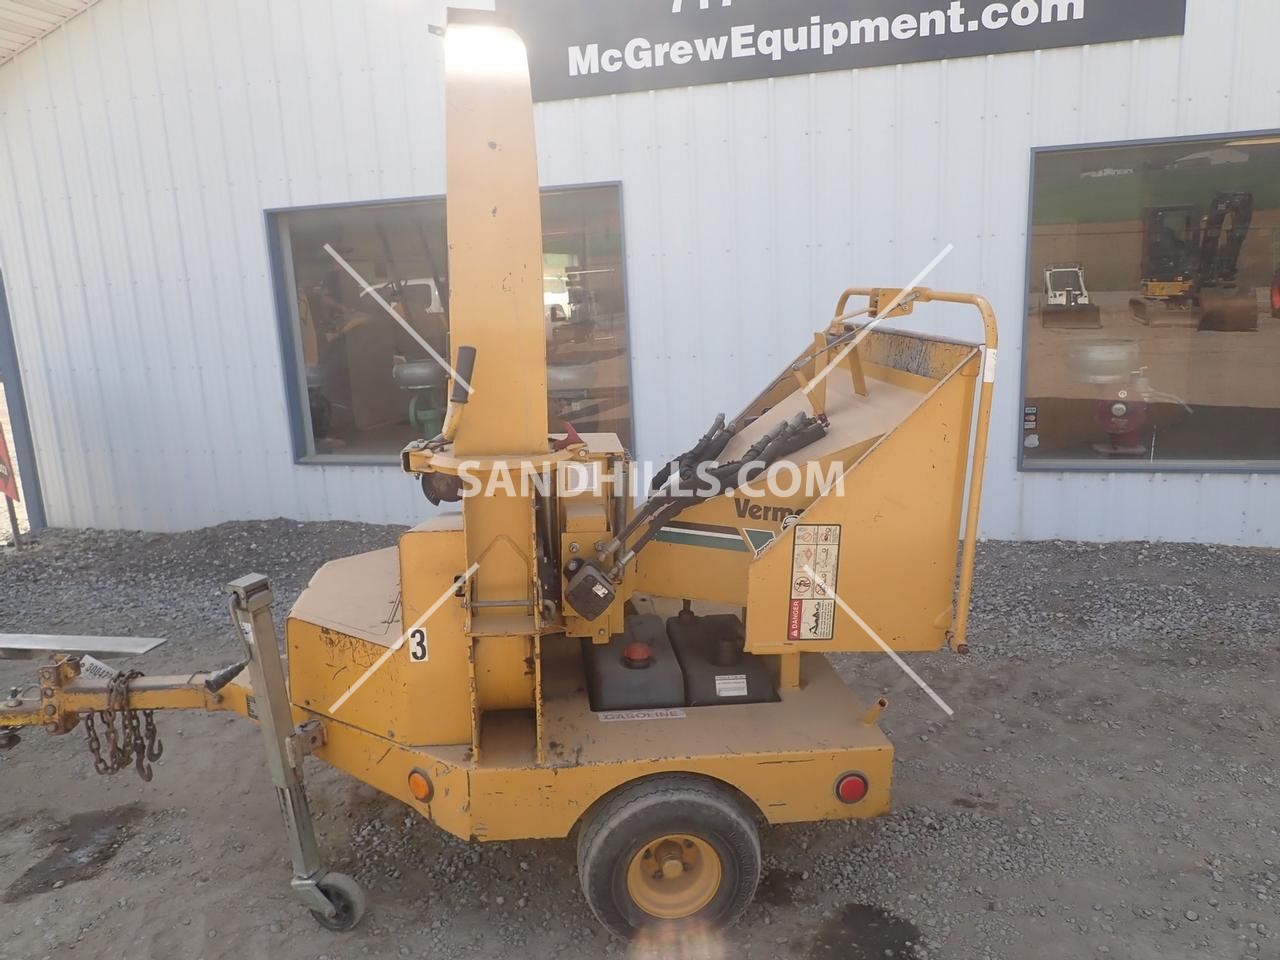 EquipmentFacts.com | 2005 VERMEER BC625A Online Auctions